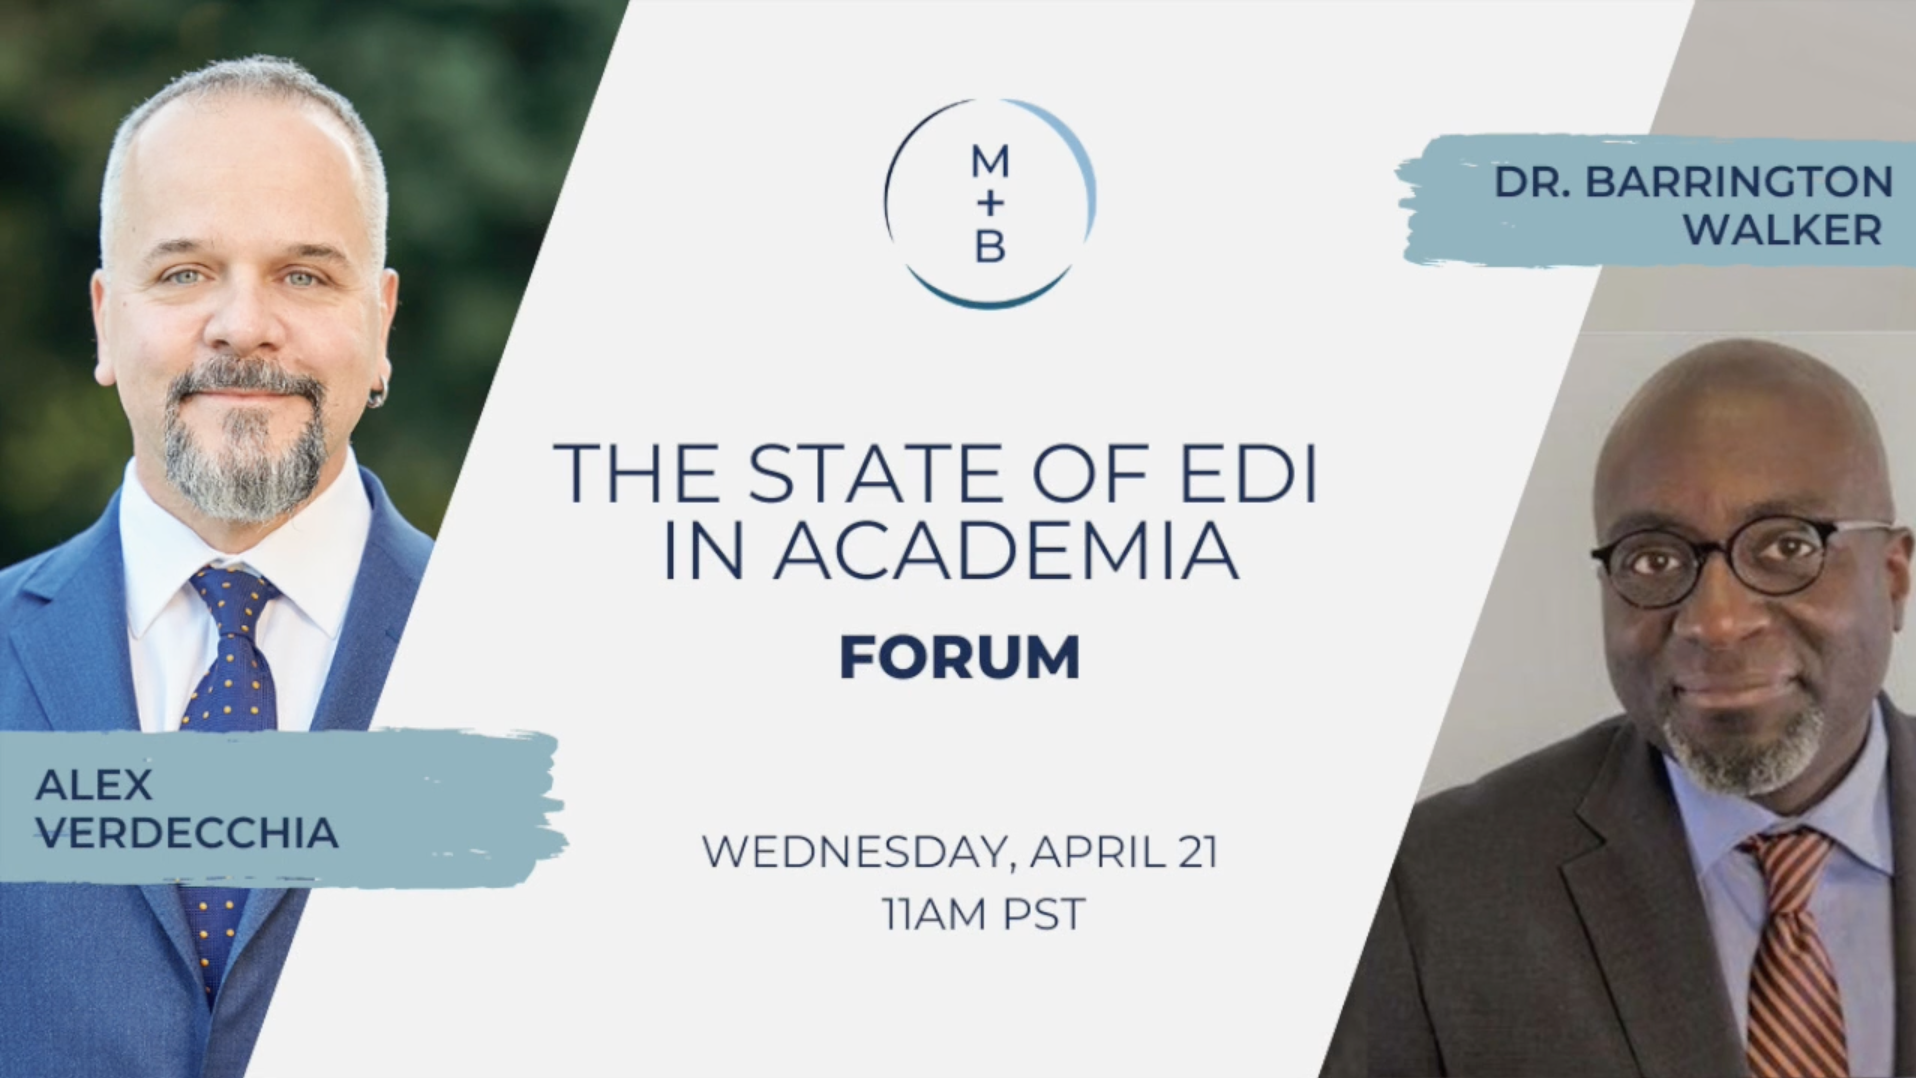 The State of EDI in Academia Forum with Alex Verdecchia and Dr. Barrington Walker